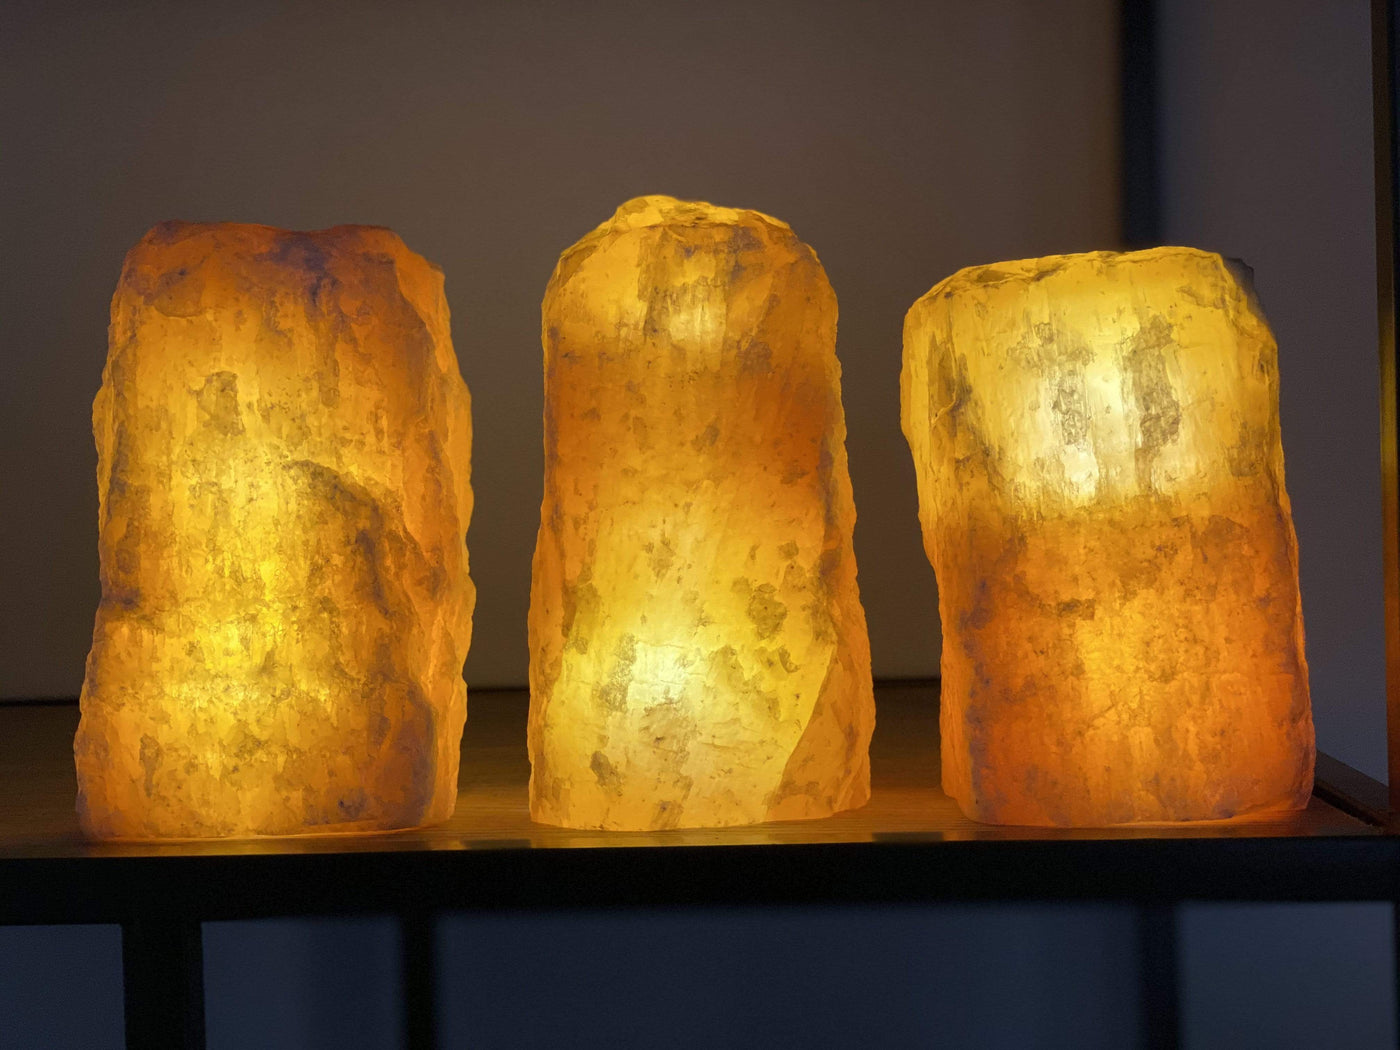 3 Rough Stone Lamps lit up in a dark room